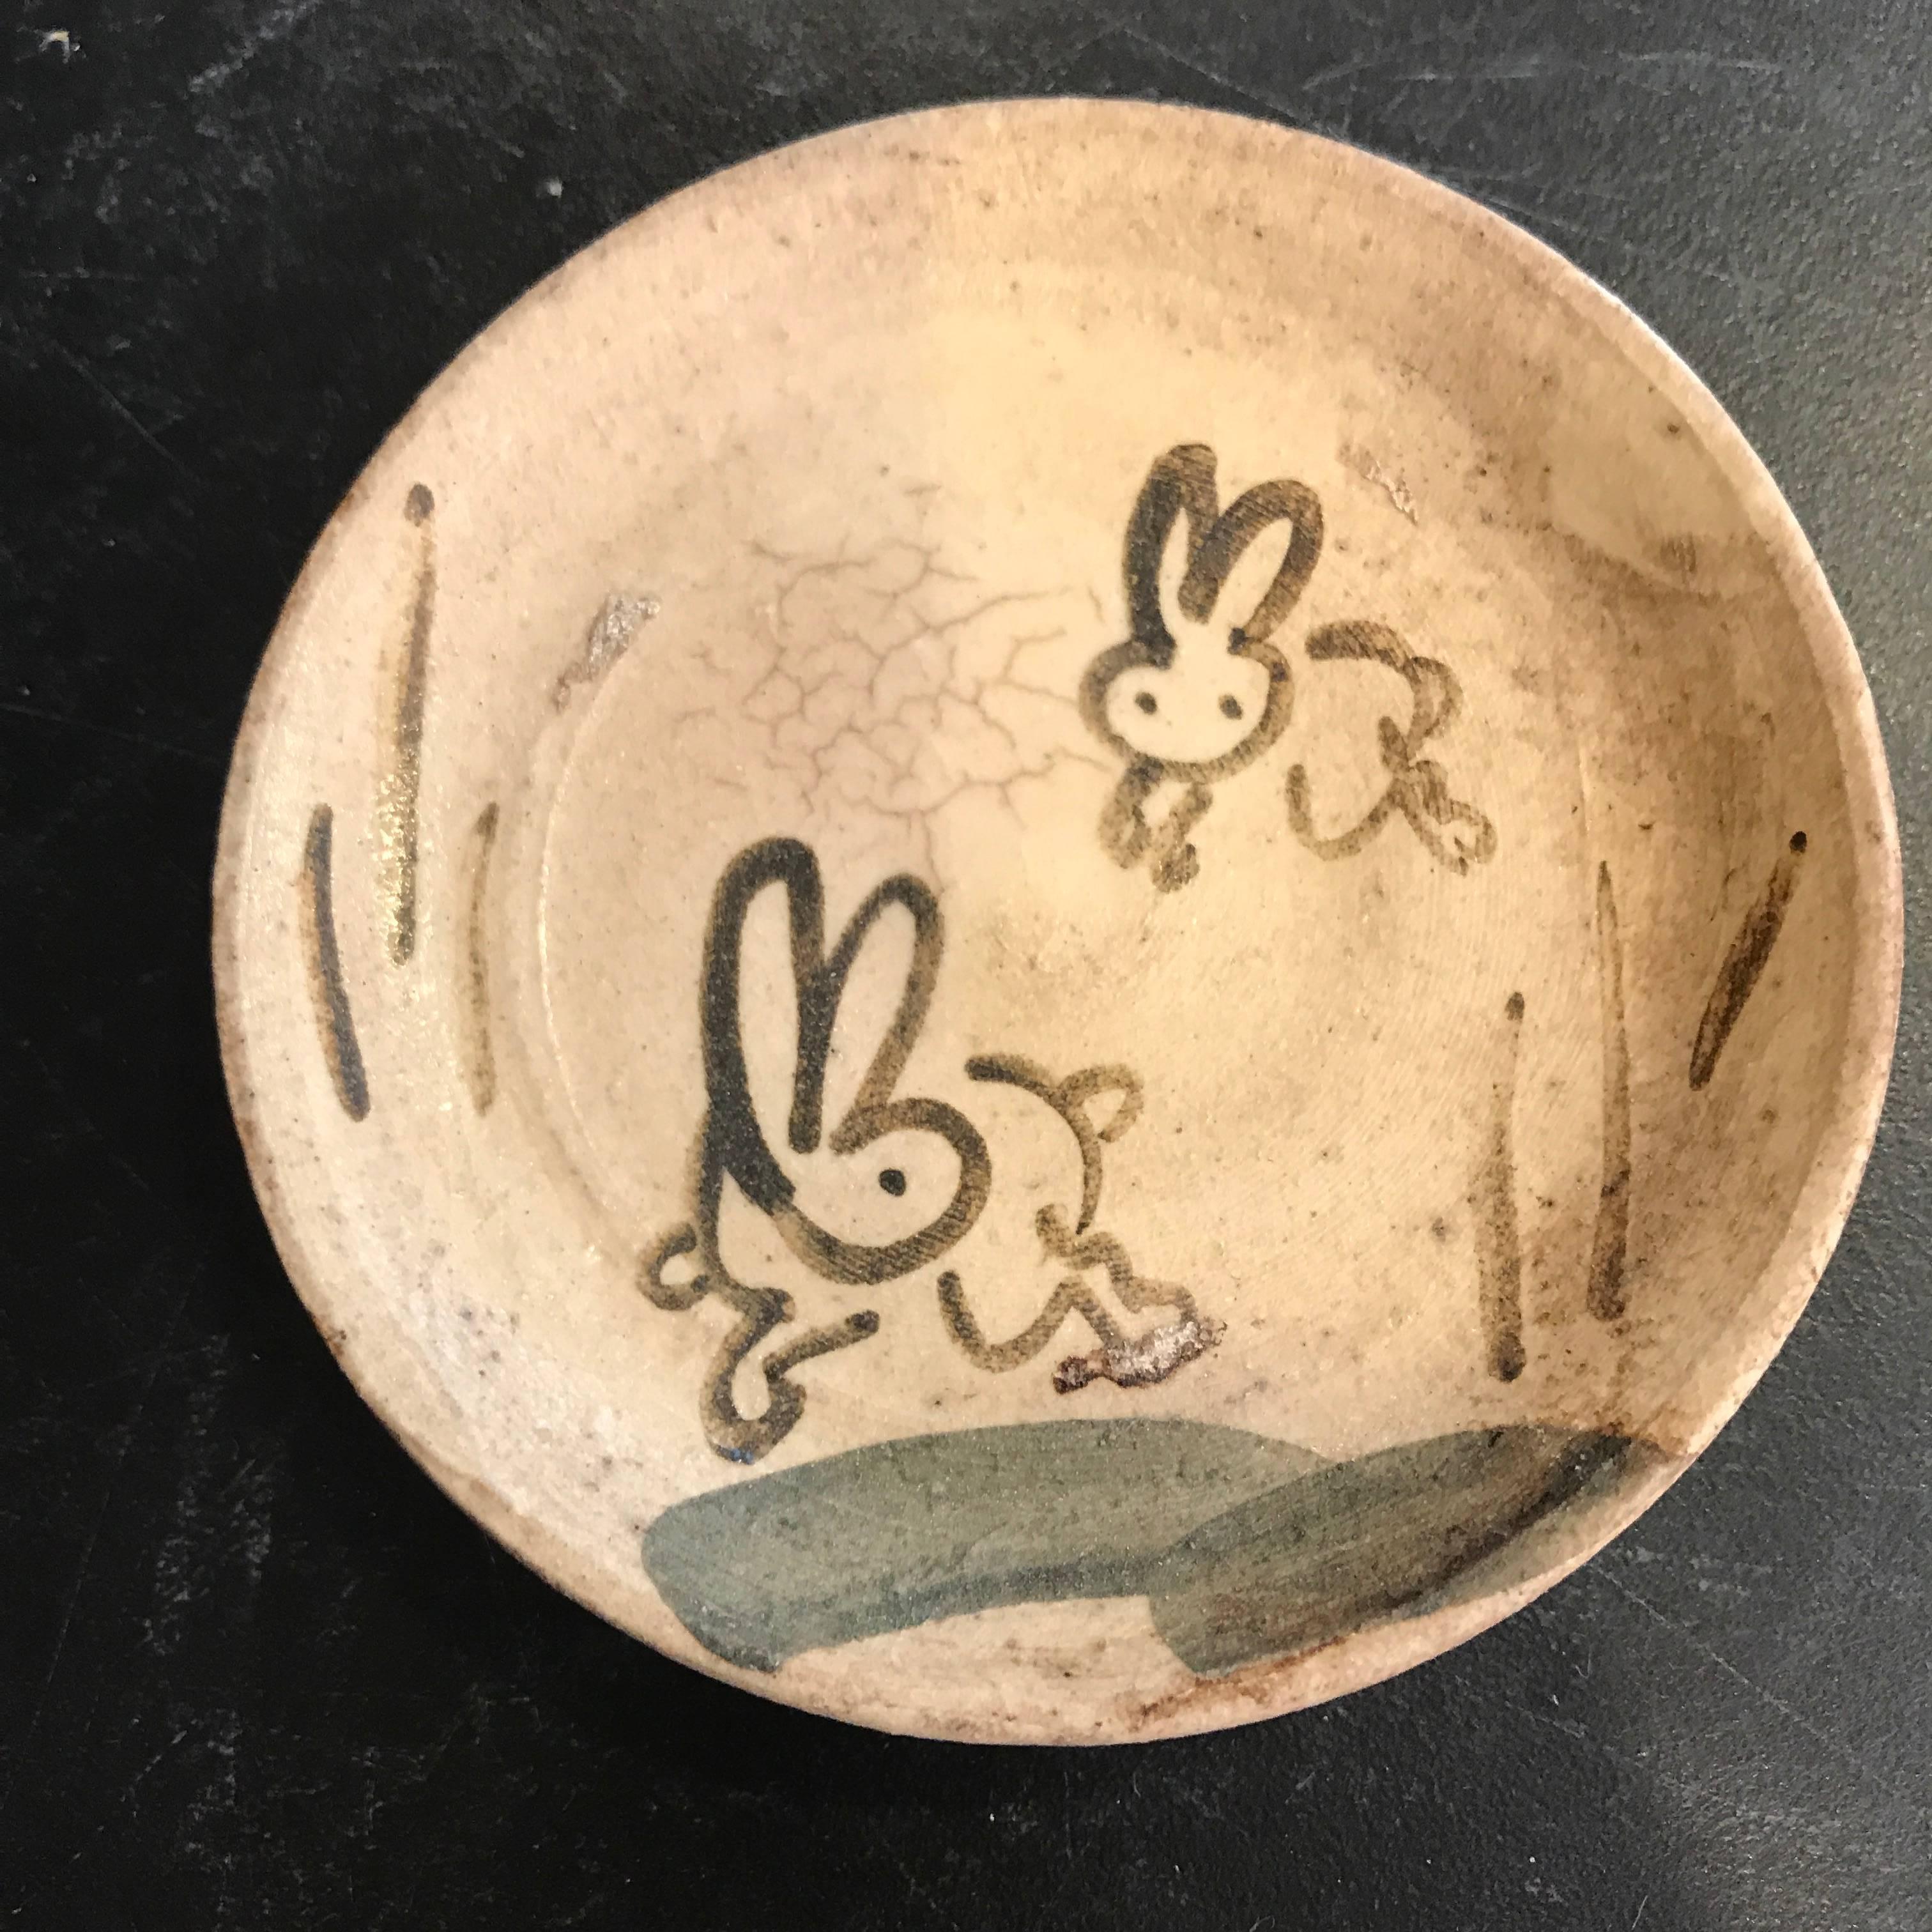 Old Japan Pair of Playful Rabbit Serving Plates Mint Condition 1